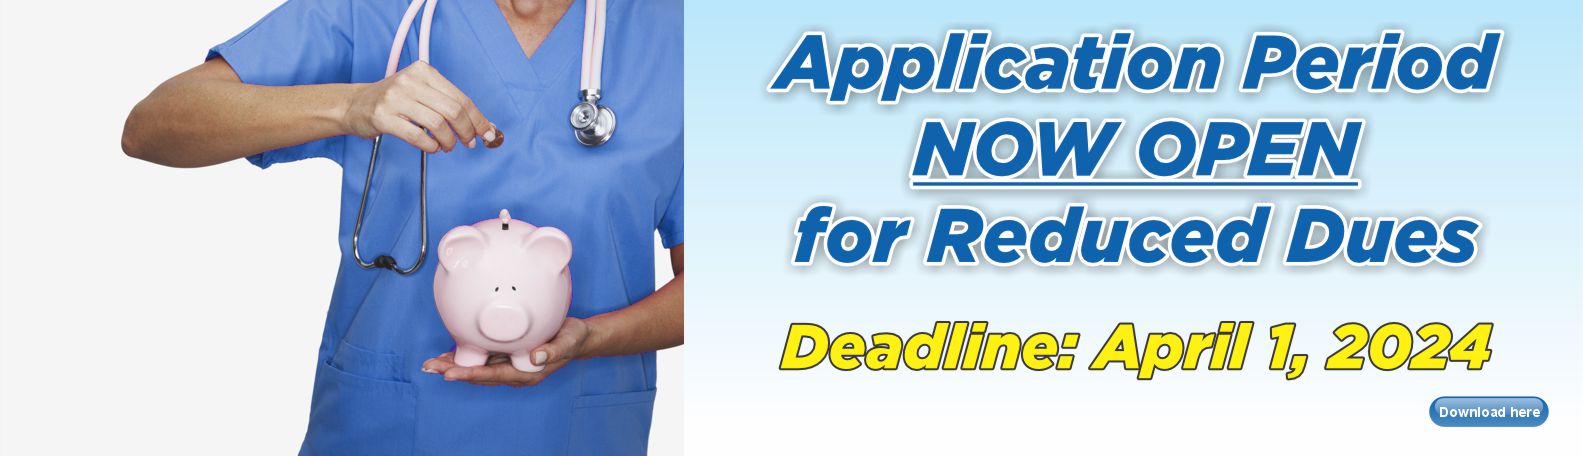 Application Period Now Open for Reduced Dues, deadline April 1, 2024